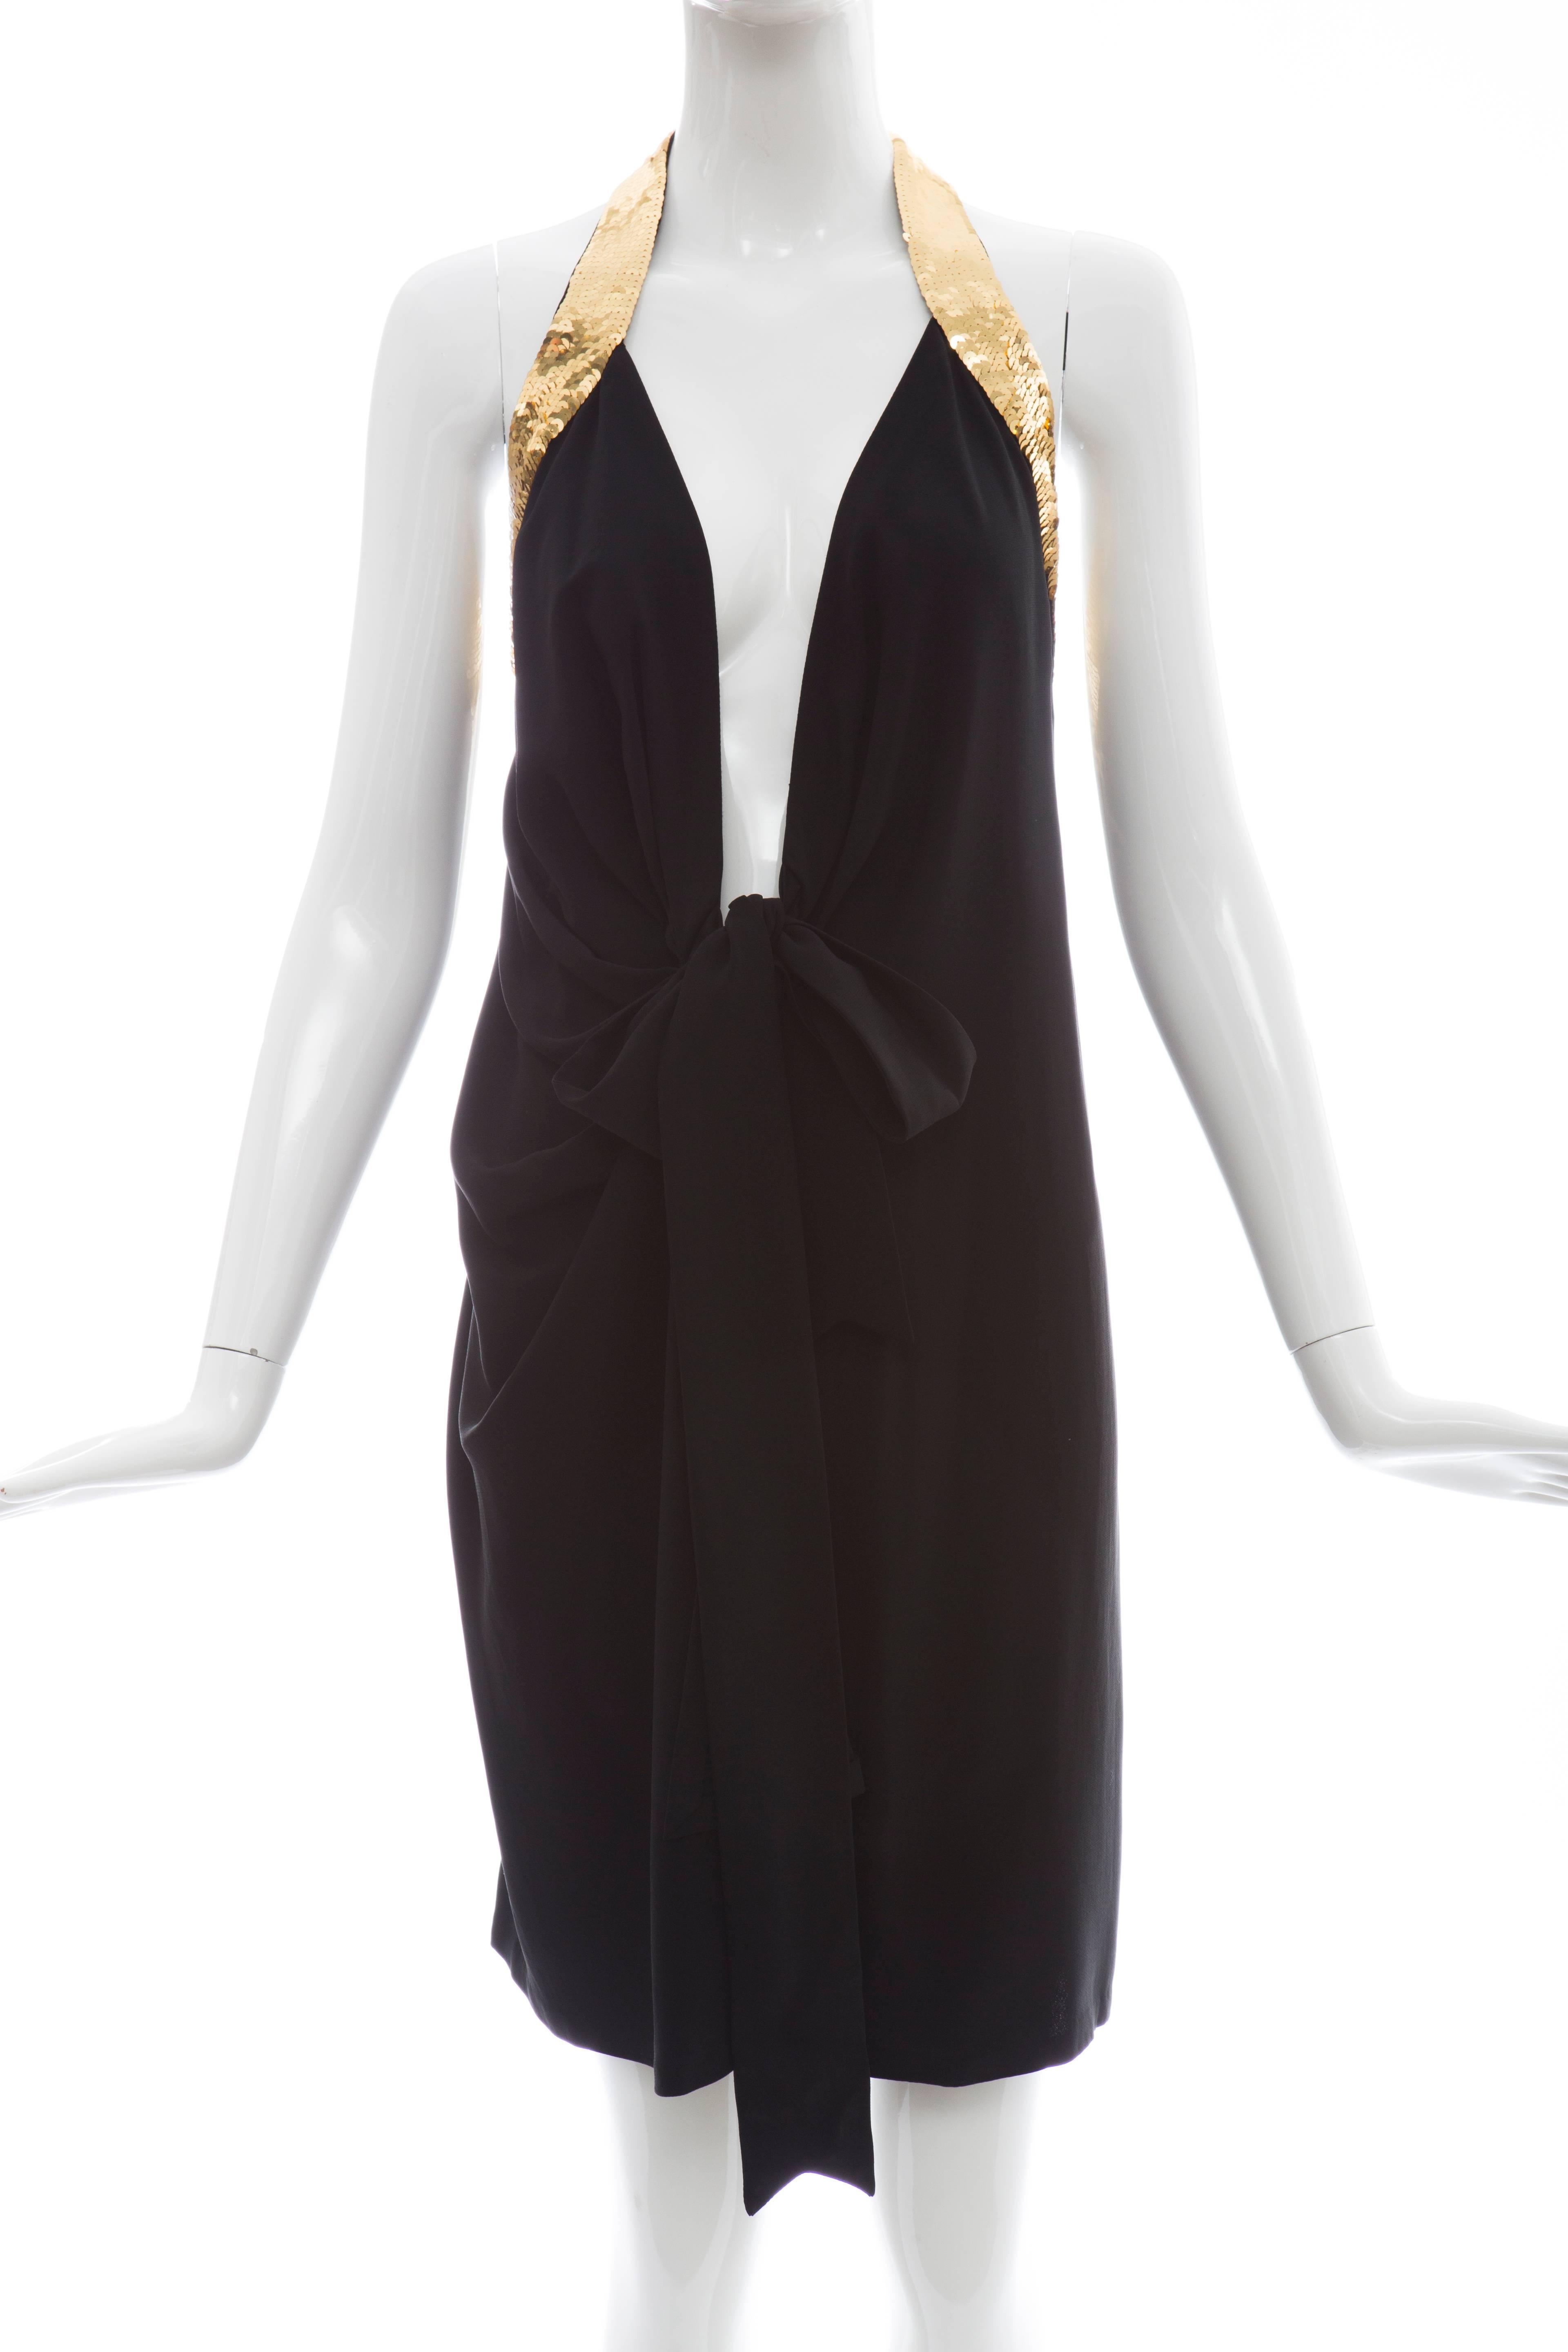 Moschino Couture, circa 1993, black rayon acetate evening dress with back gold sequin peace sign.

US. 8

Bust: 32